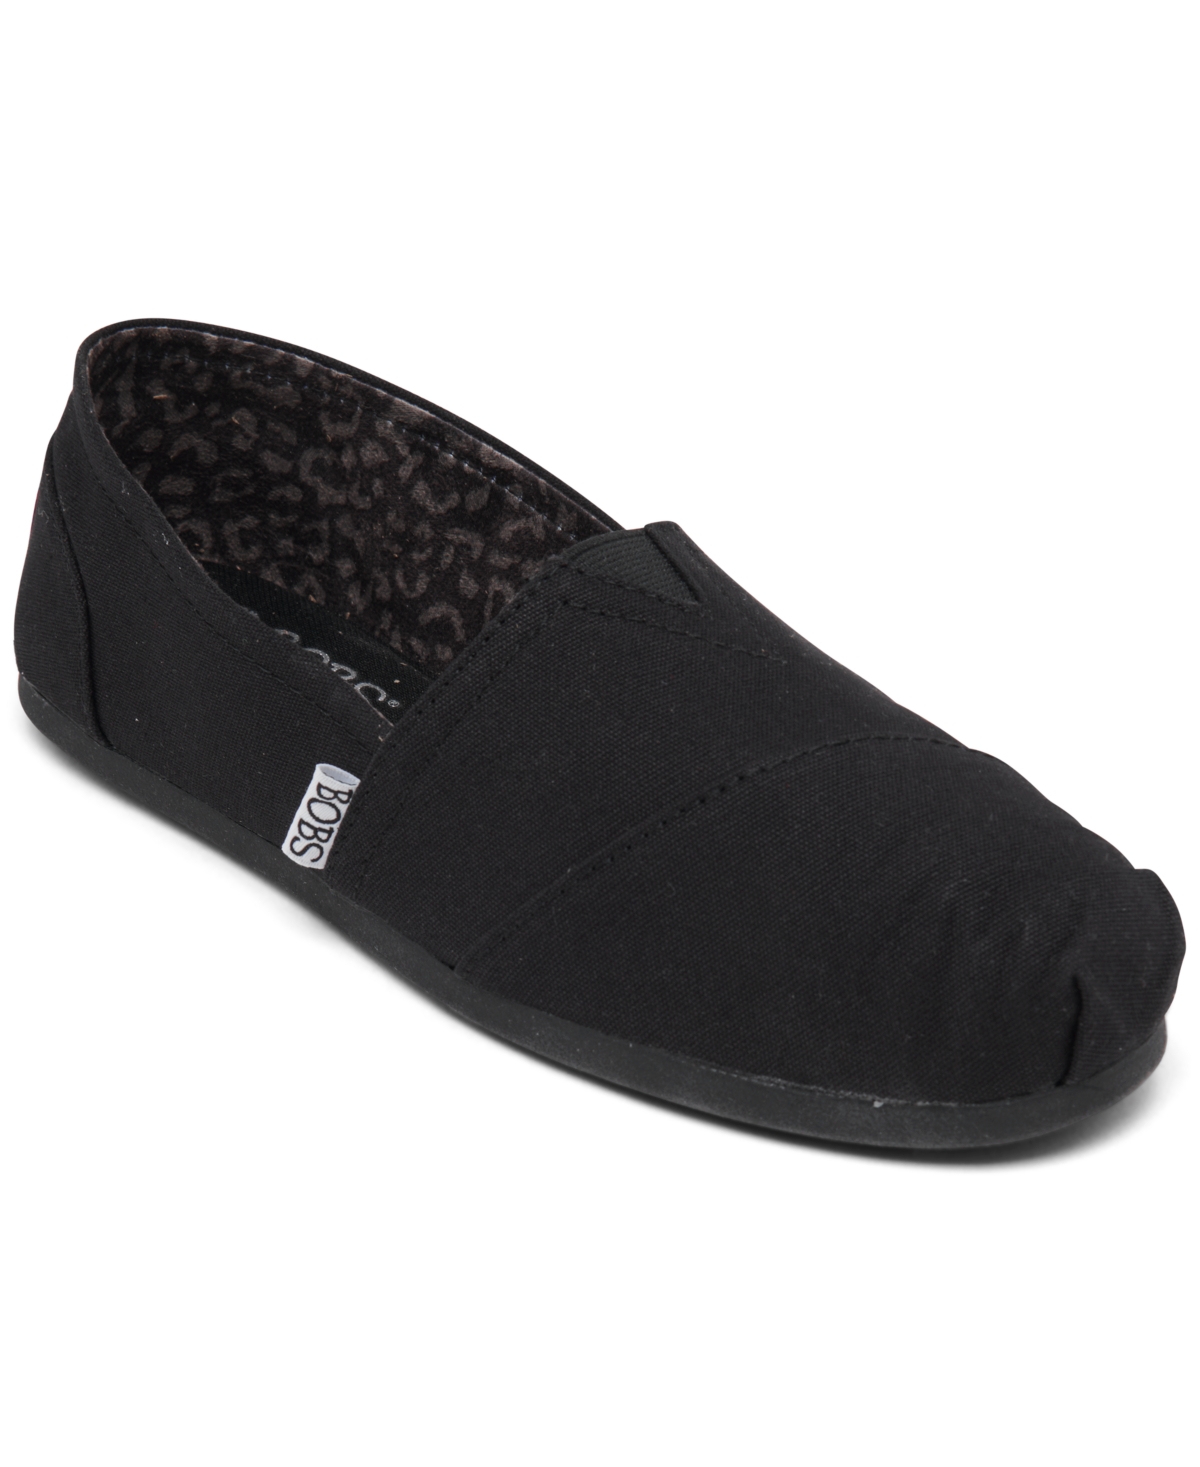 Women's Bobs Plush - Peace and Love Casual Slip-On Flats from Finish Line - Black